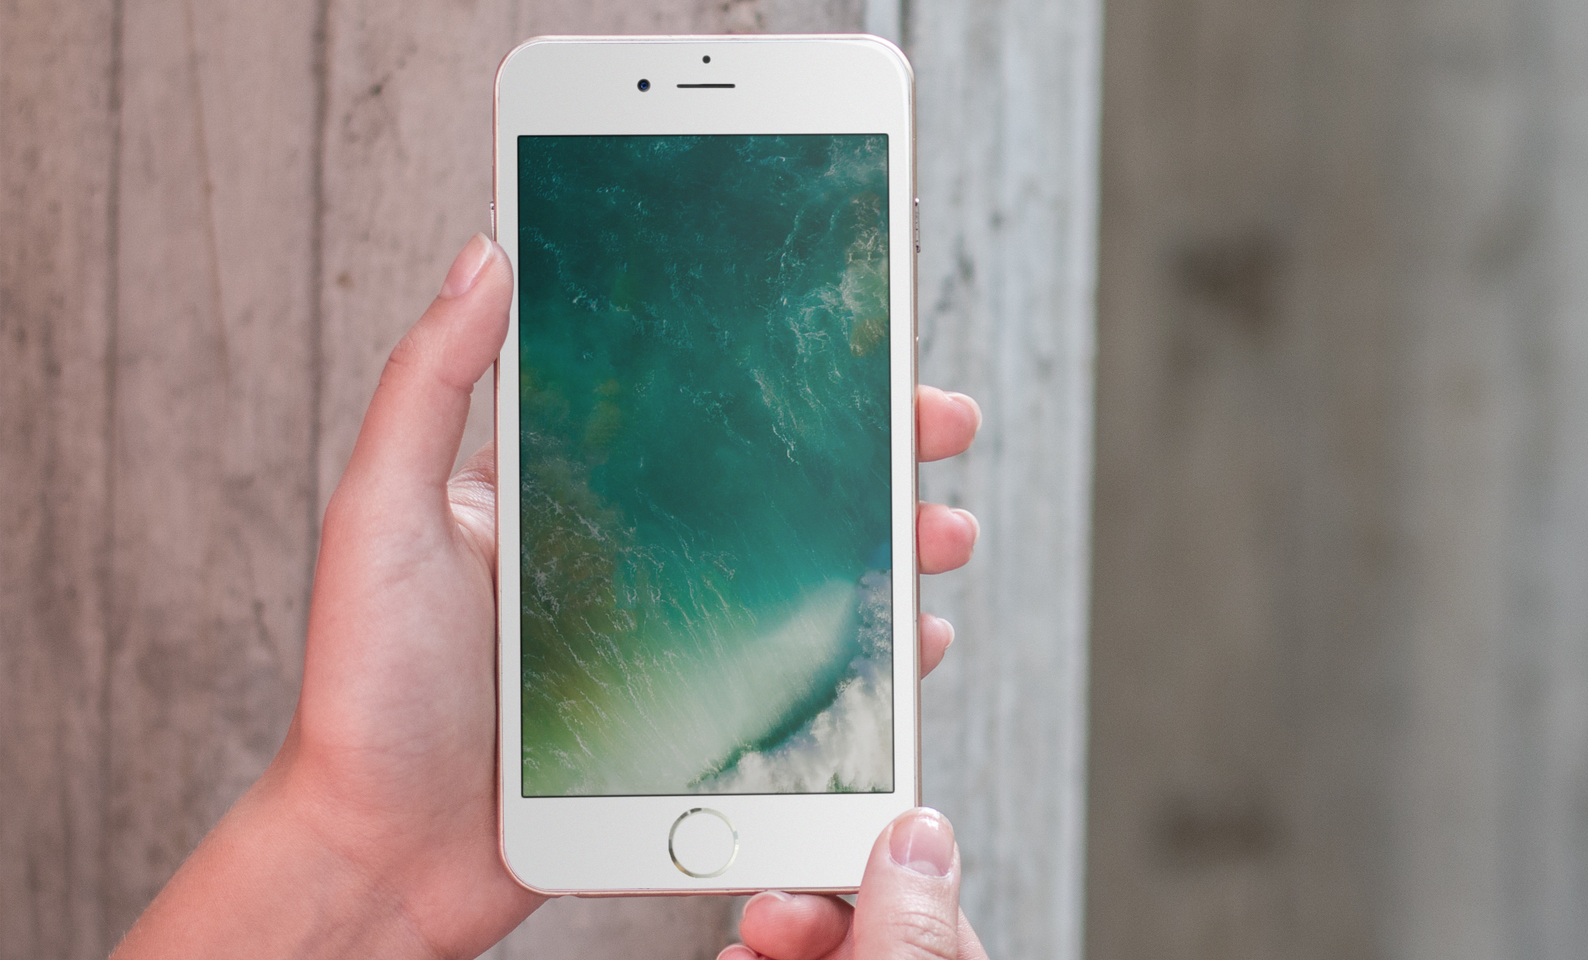 Download the new iOS 10 wallpapers for iPhone and iPad